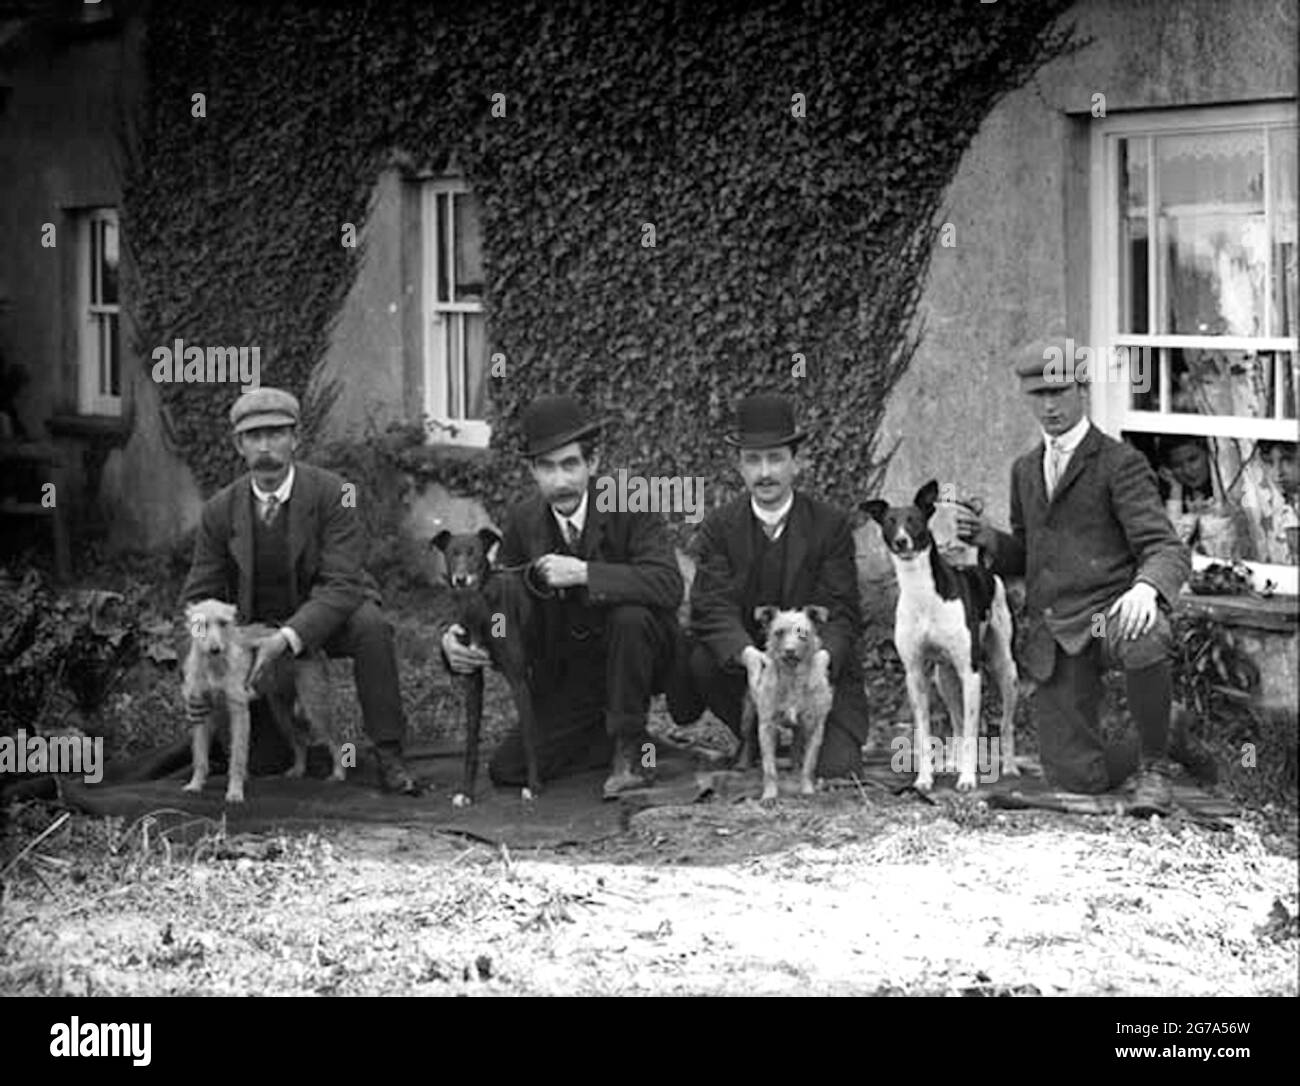 Quirky vintage photograph posing the question Do dog owners grow to look like their dog? Stock Photo